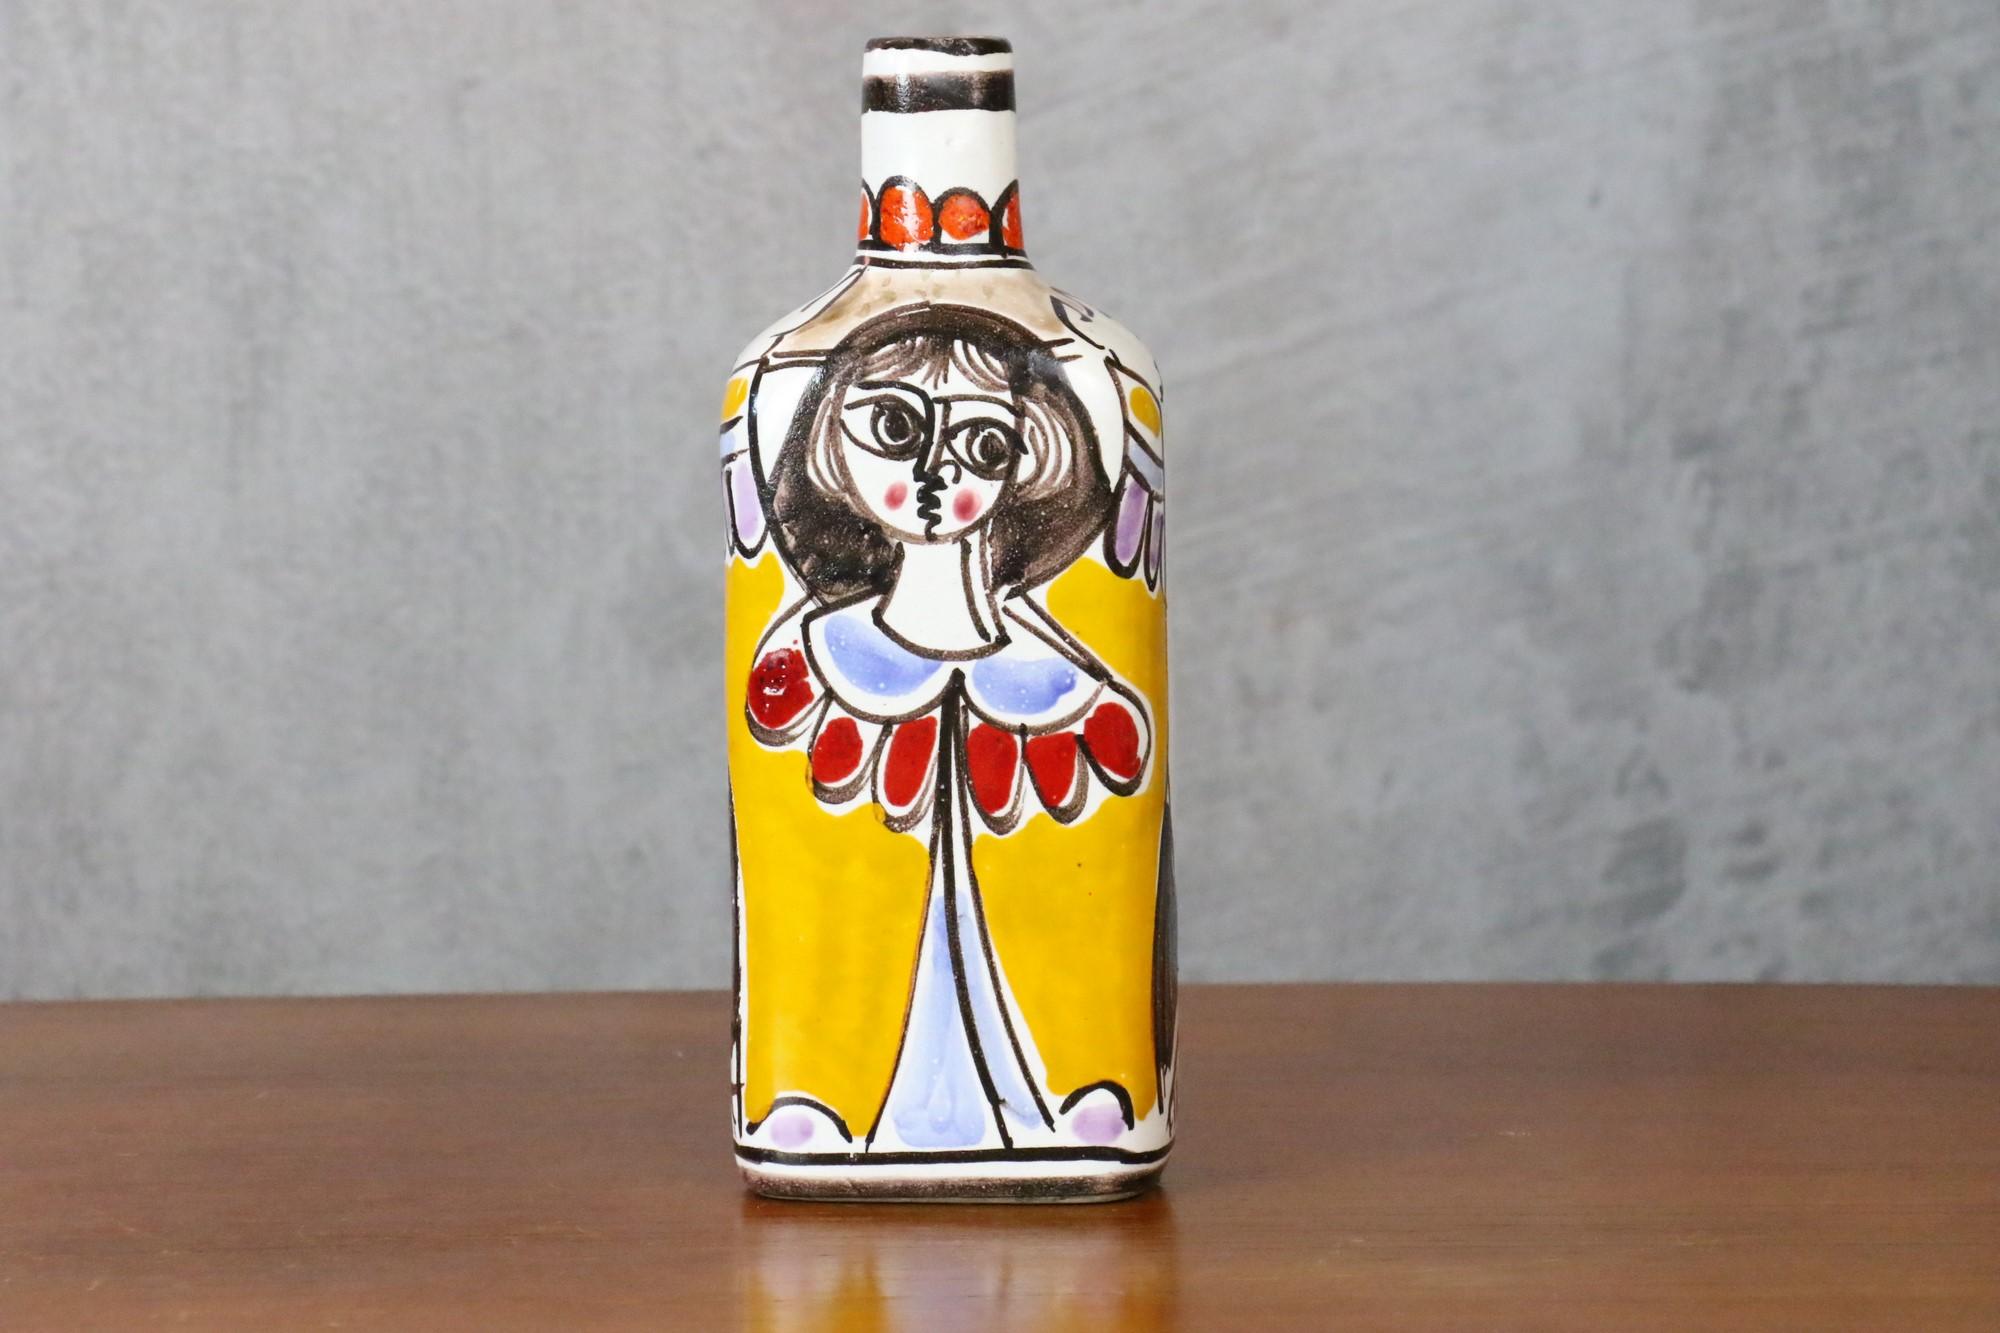 Desimone, hand painted ceramic bottle, Italian Pottery, circa 1960 - Aldo Londi

Very beautiful bottle representing a woman carrying a basket of fruits or vegetables on the top of her head.
We recognize the potter's attraction for traditional